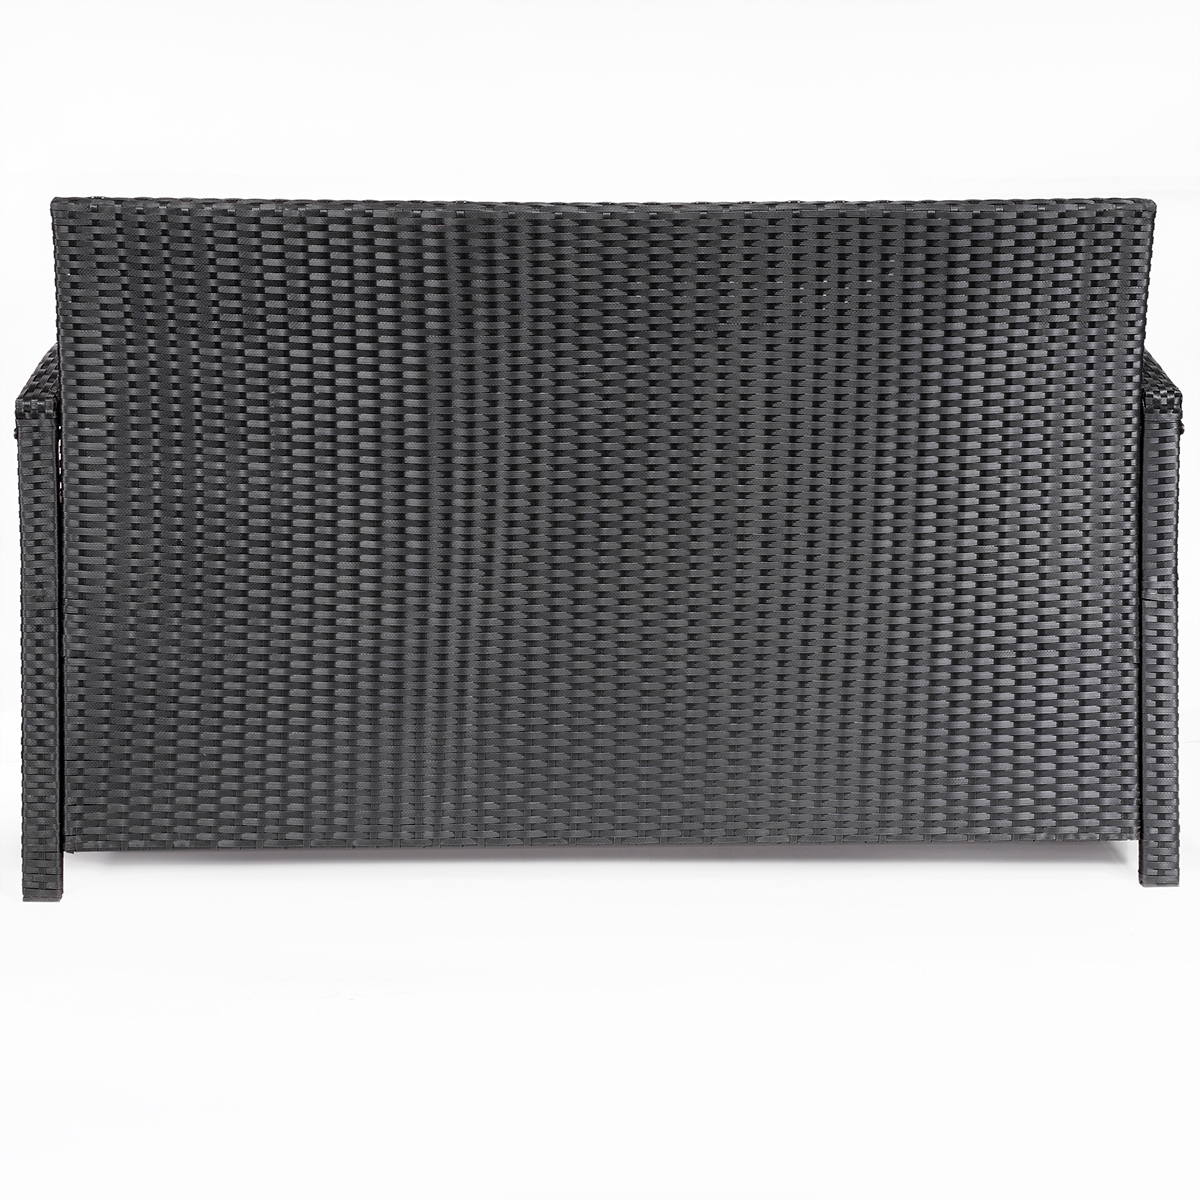 Outdoor Storage Bench with Cushion Weather Resistant Storage Bench, Black - image 5 of 7